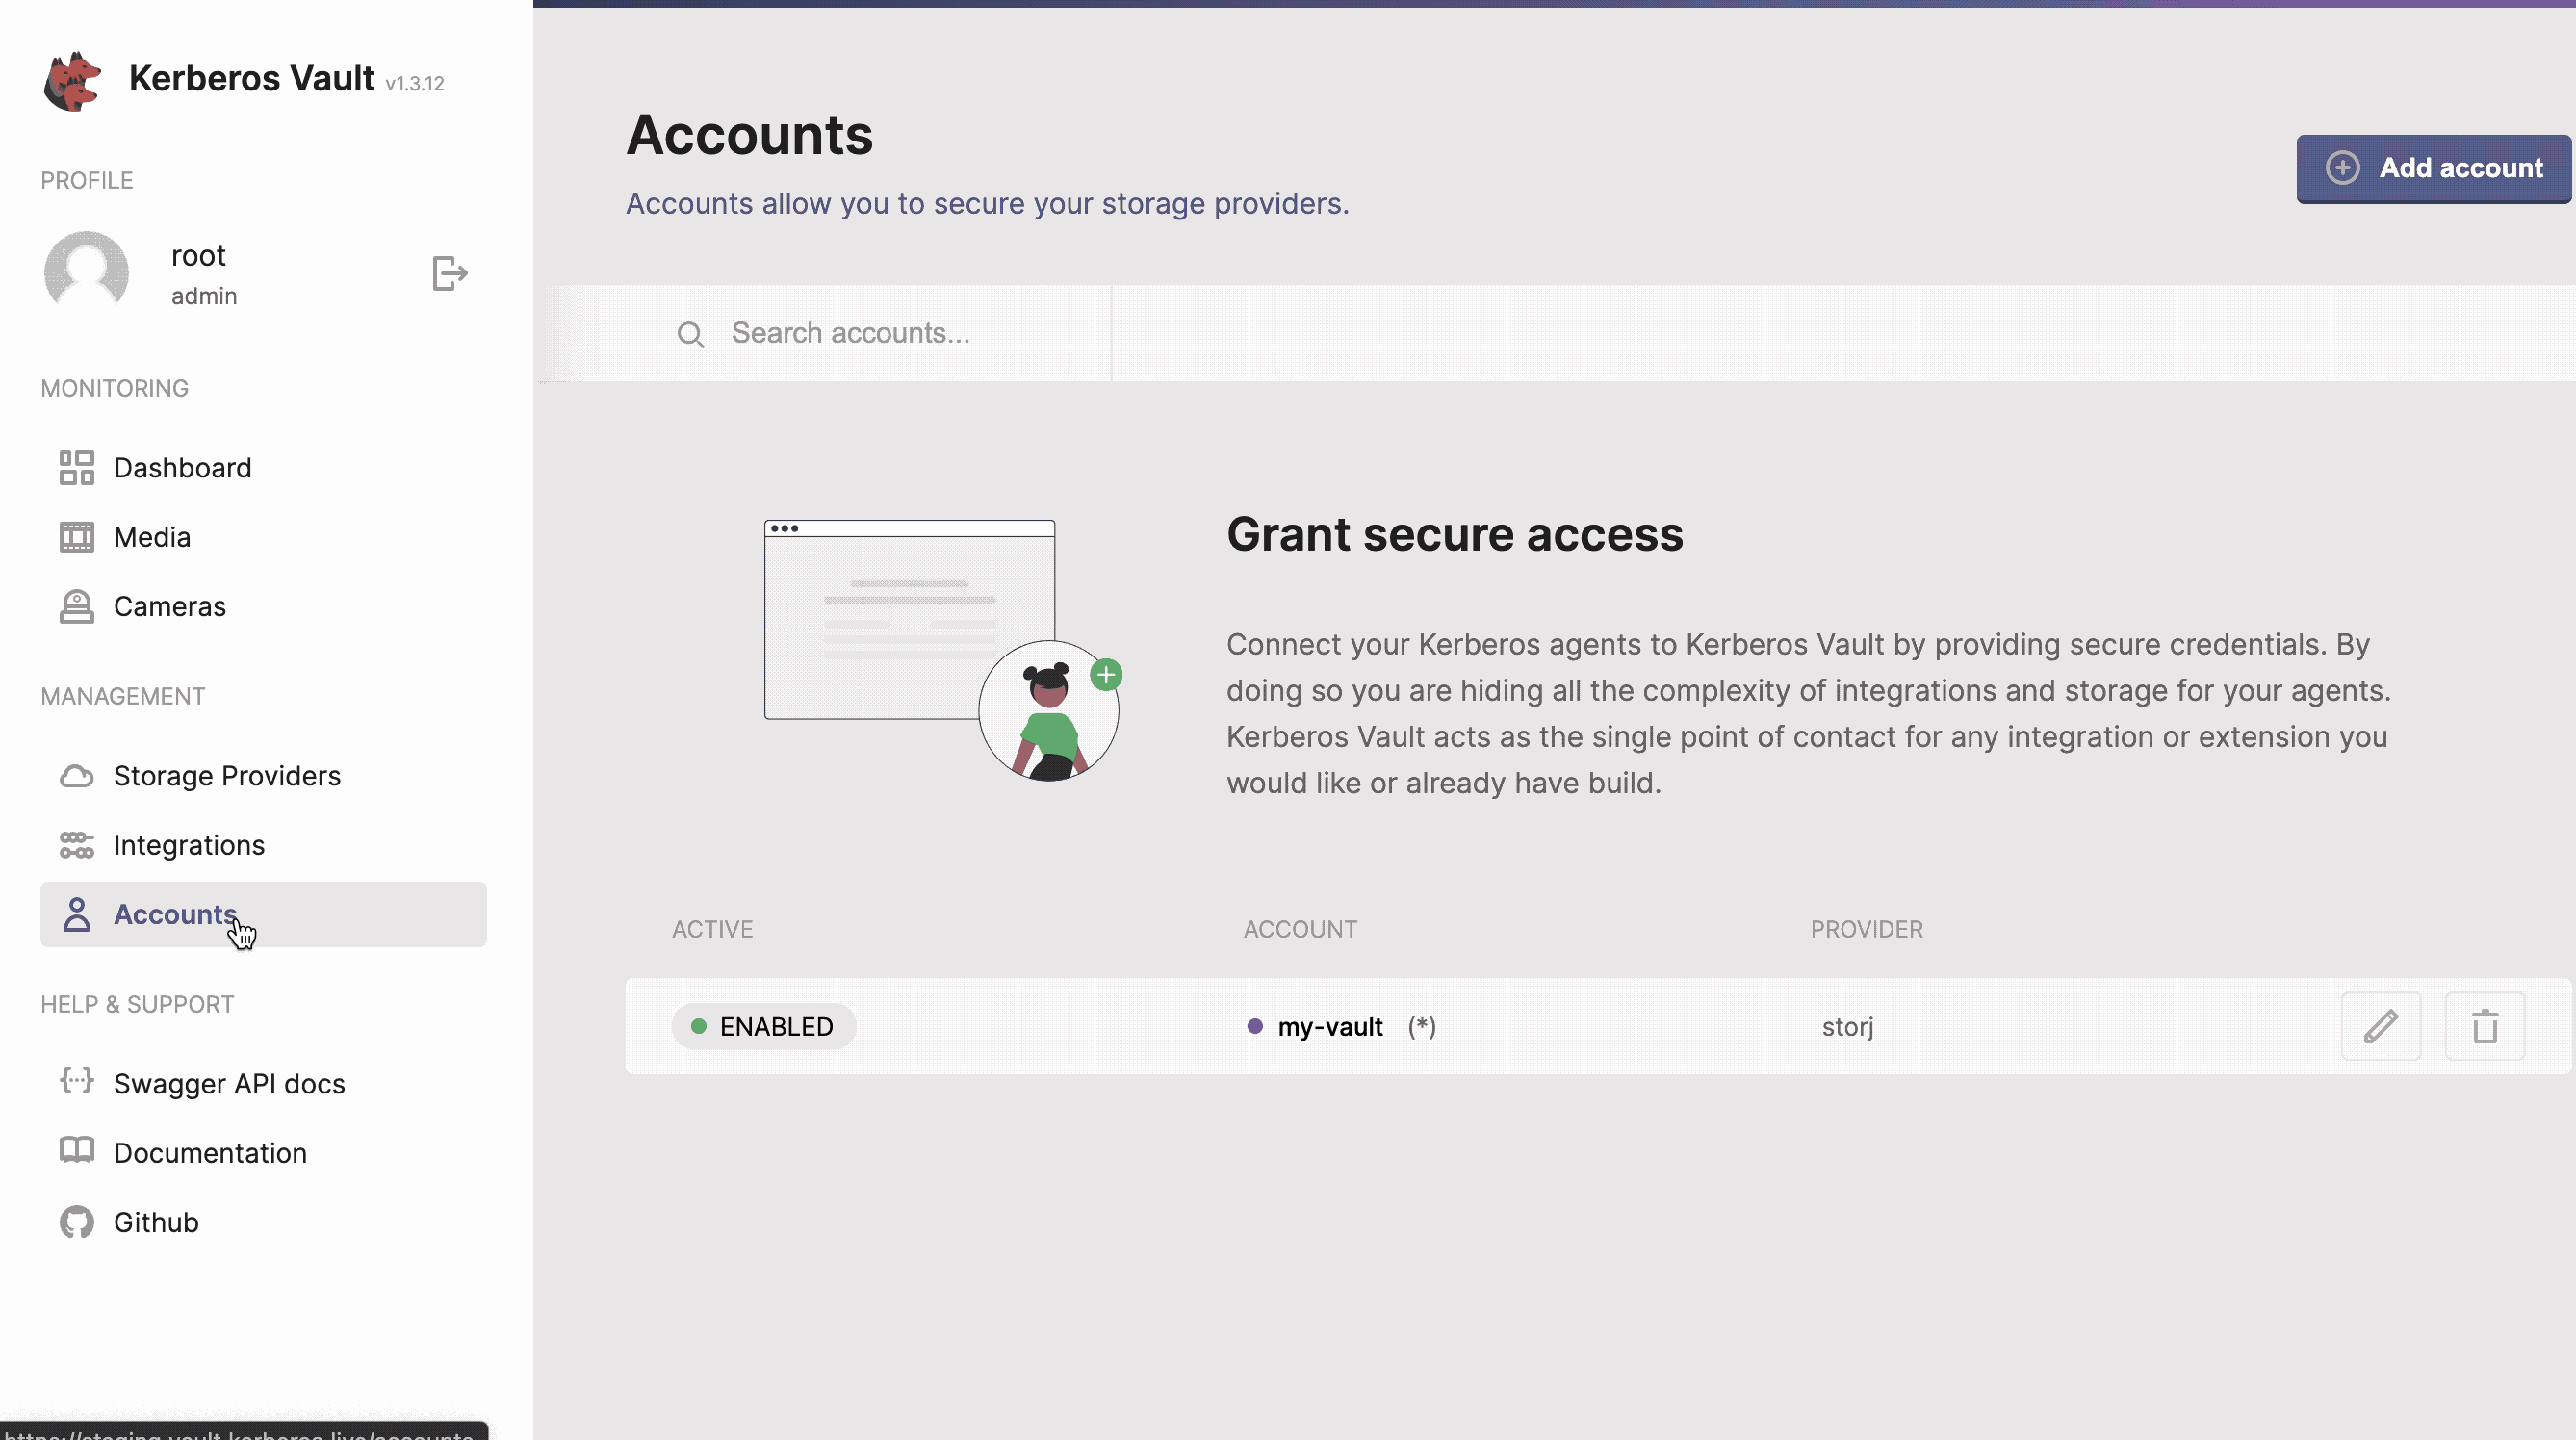 Enable the integration for your account.